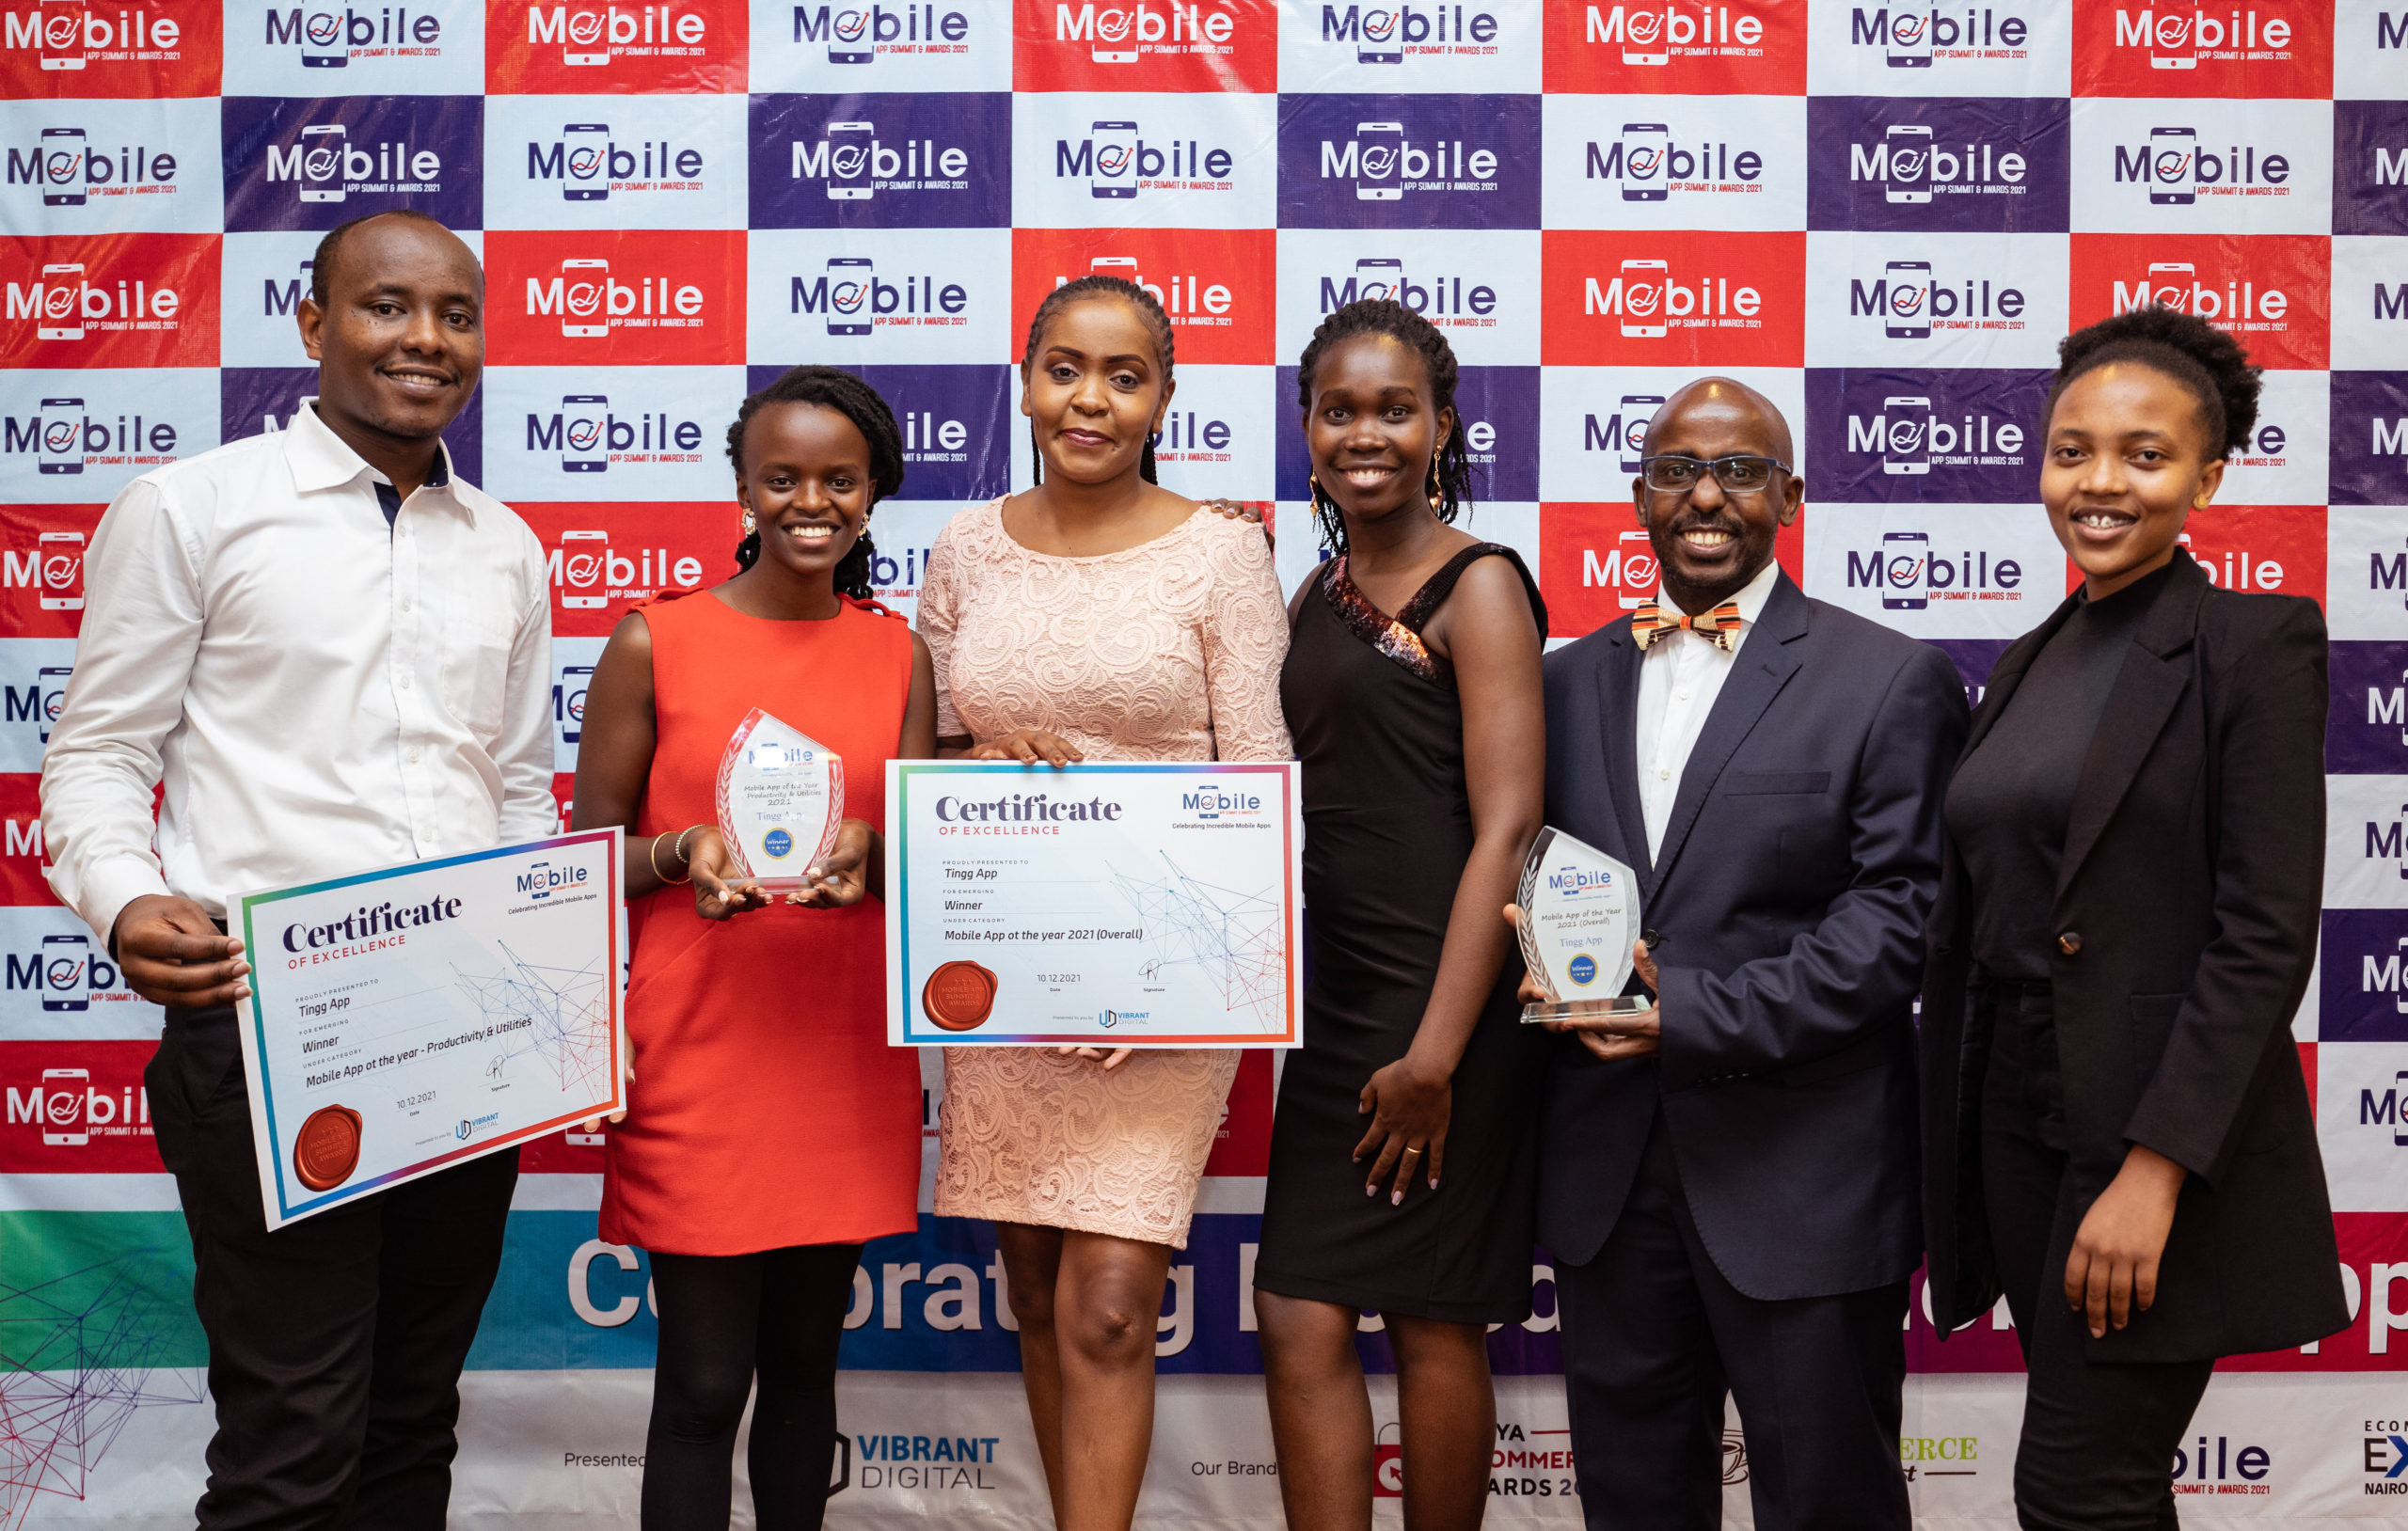 Tingg by Cellulant Wins Overall Mobile App of The Year at The Mobile App Awards Gala in Kenya